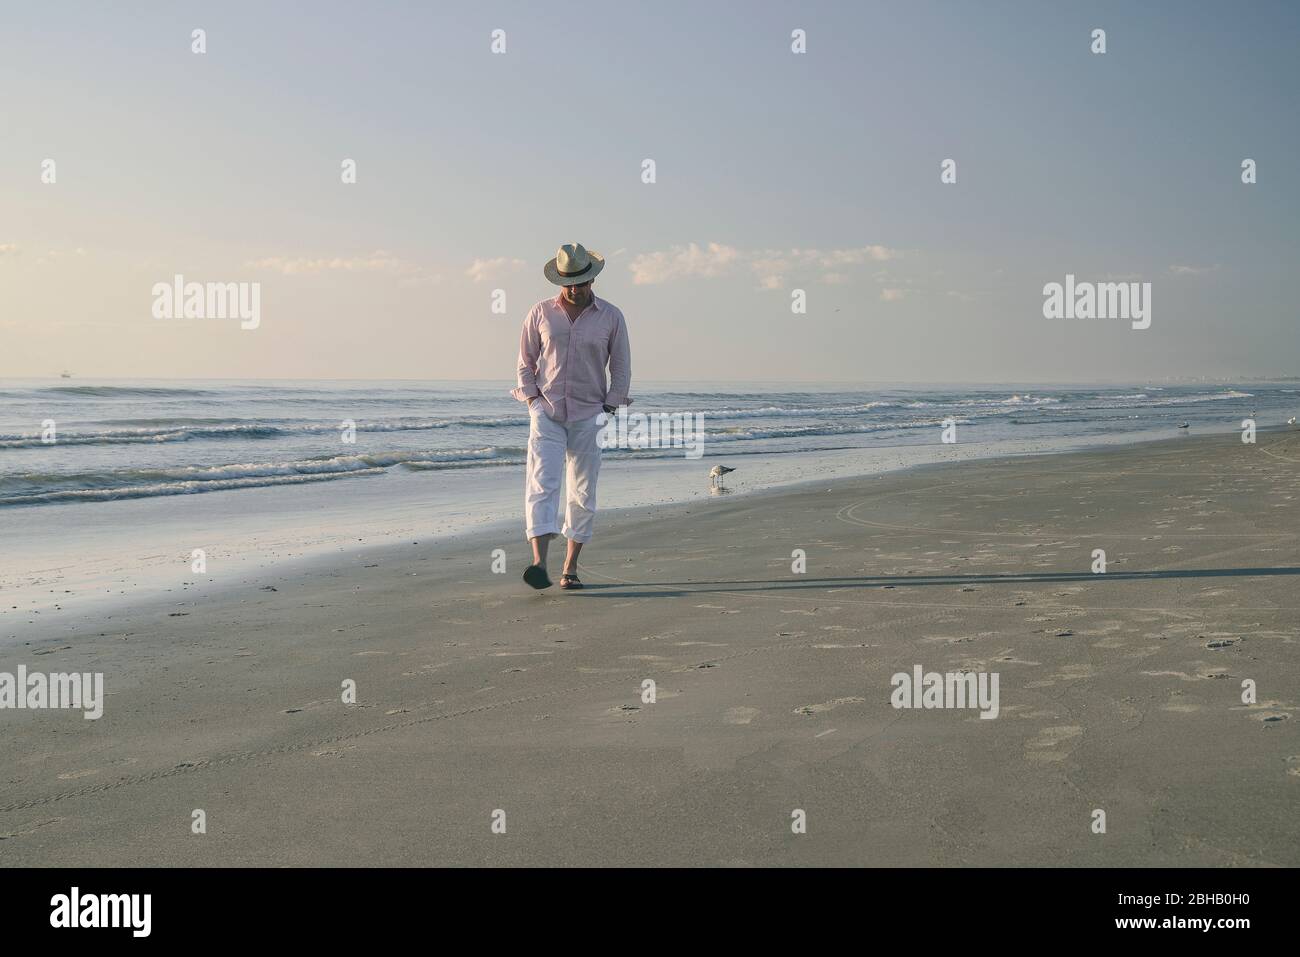 Man with hat and white trousers runs in the surf at the sea, gulls in the background Stock Photo